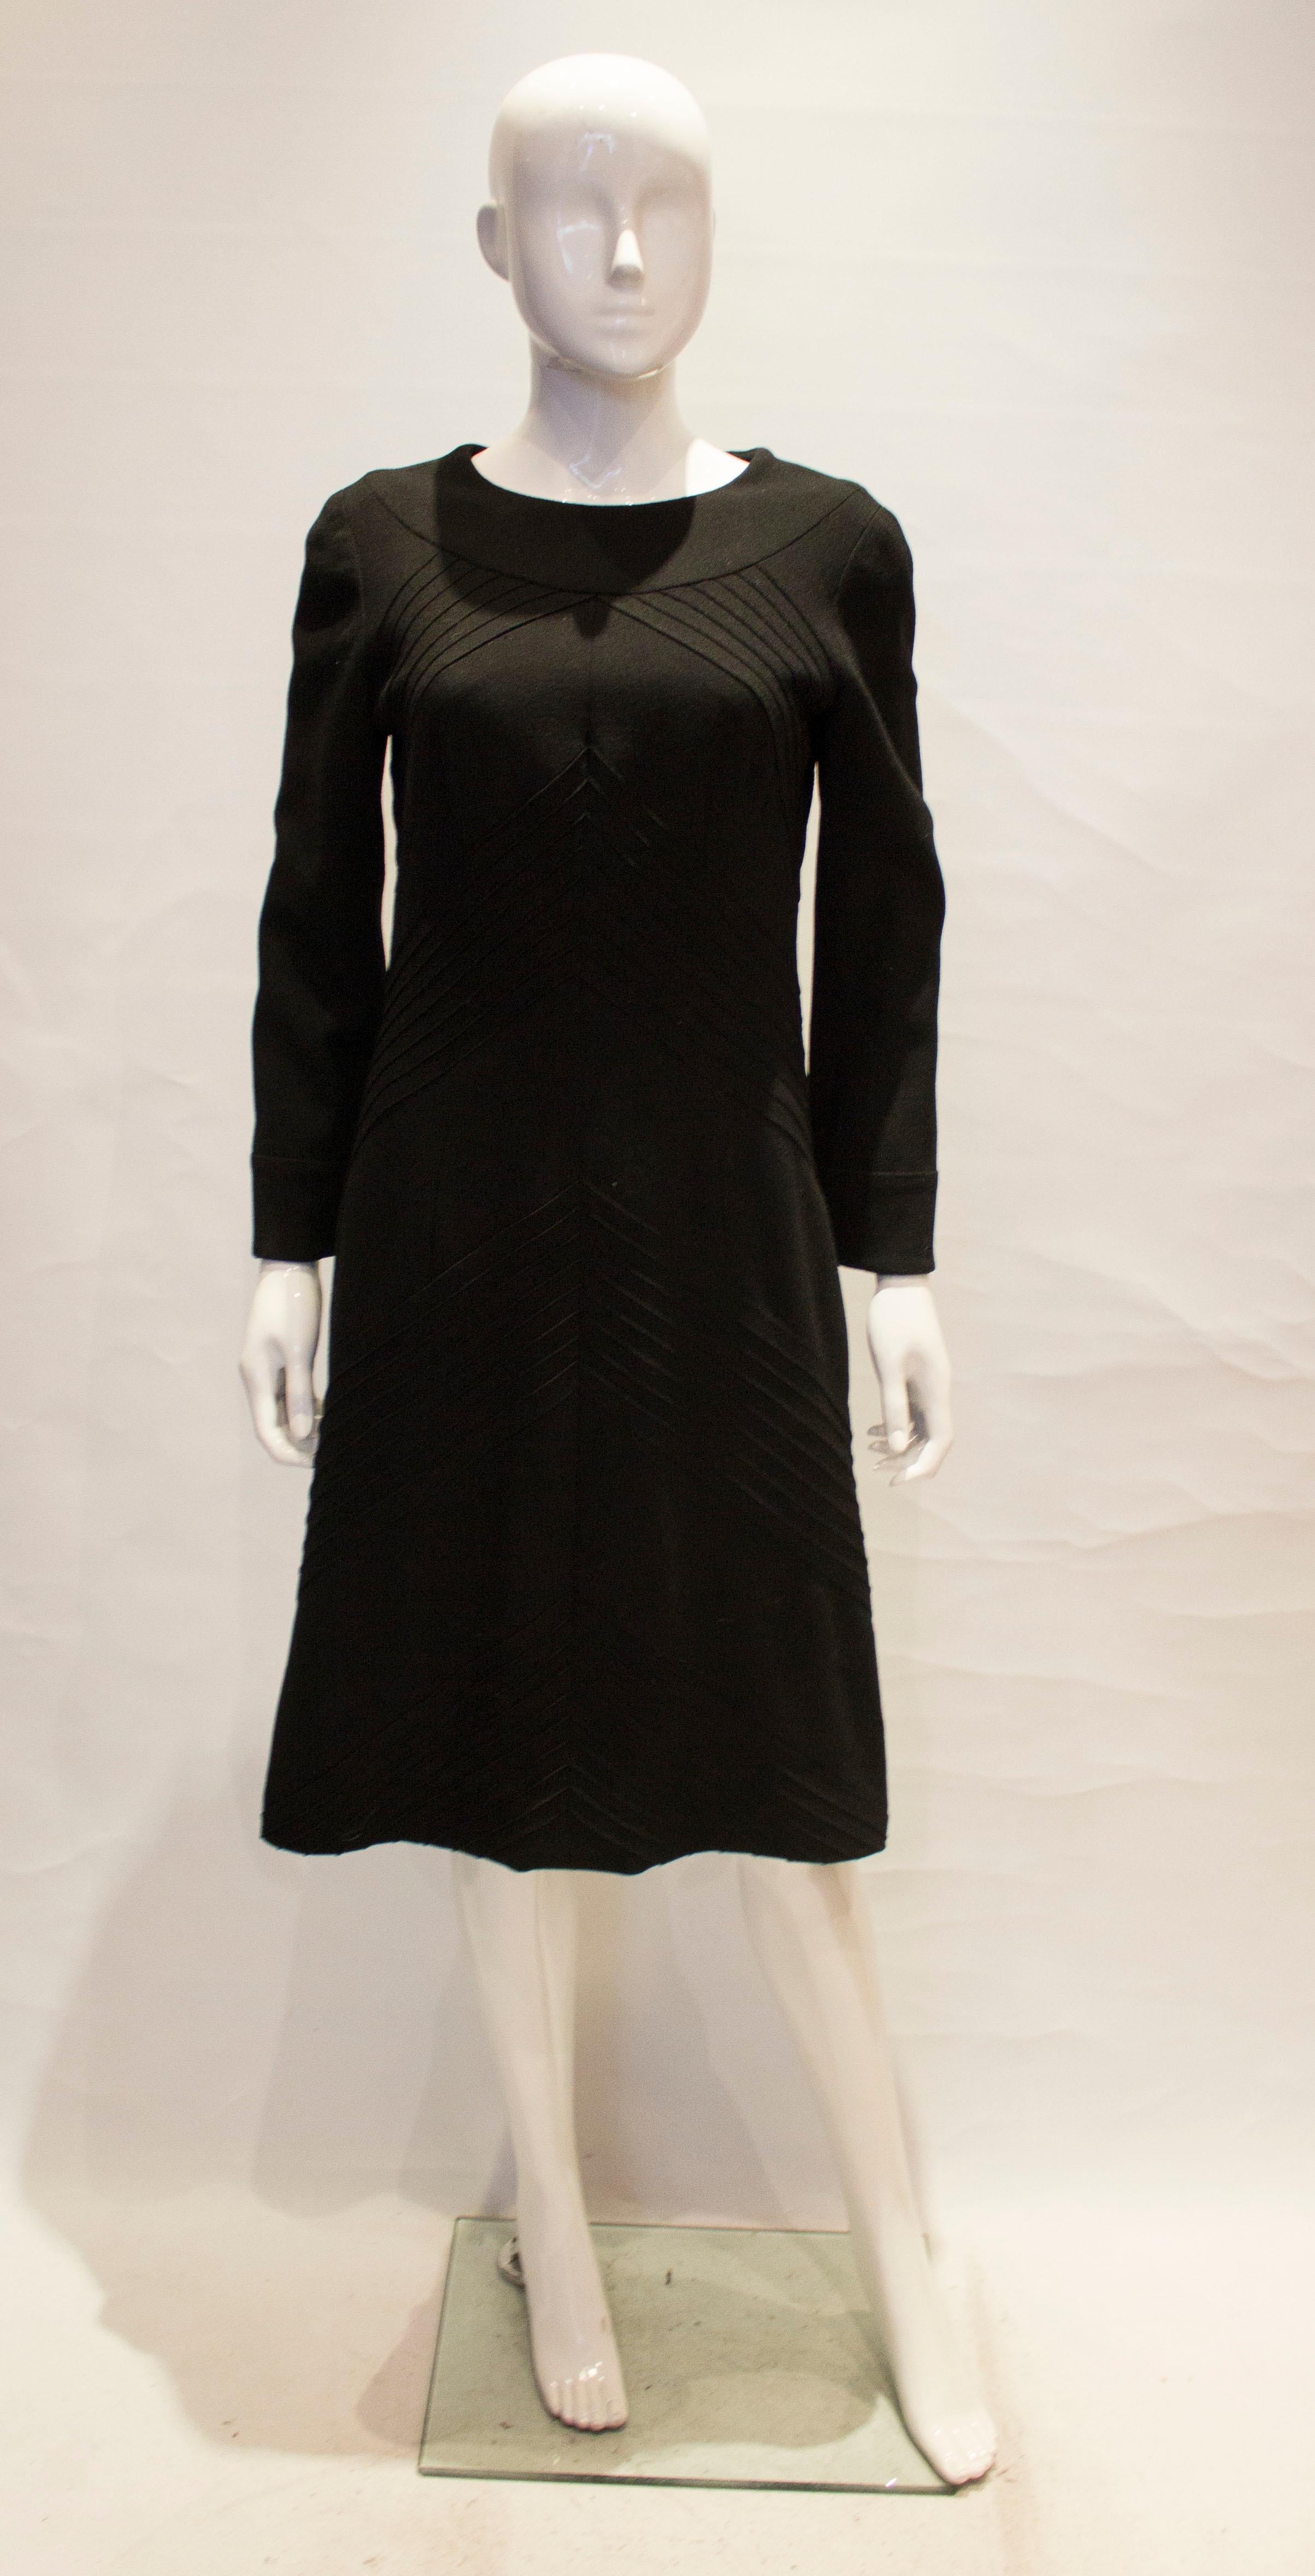 A vintage little black dress by Hartnell. The dress is in a black wool, with a round neckline and stitch detail front and back. It is fully lined and has a central back zip.